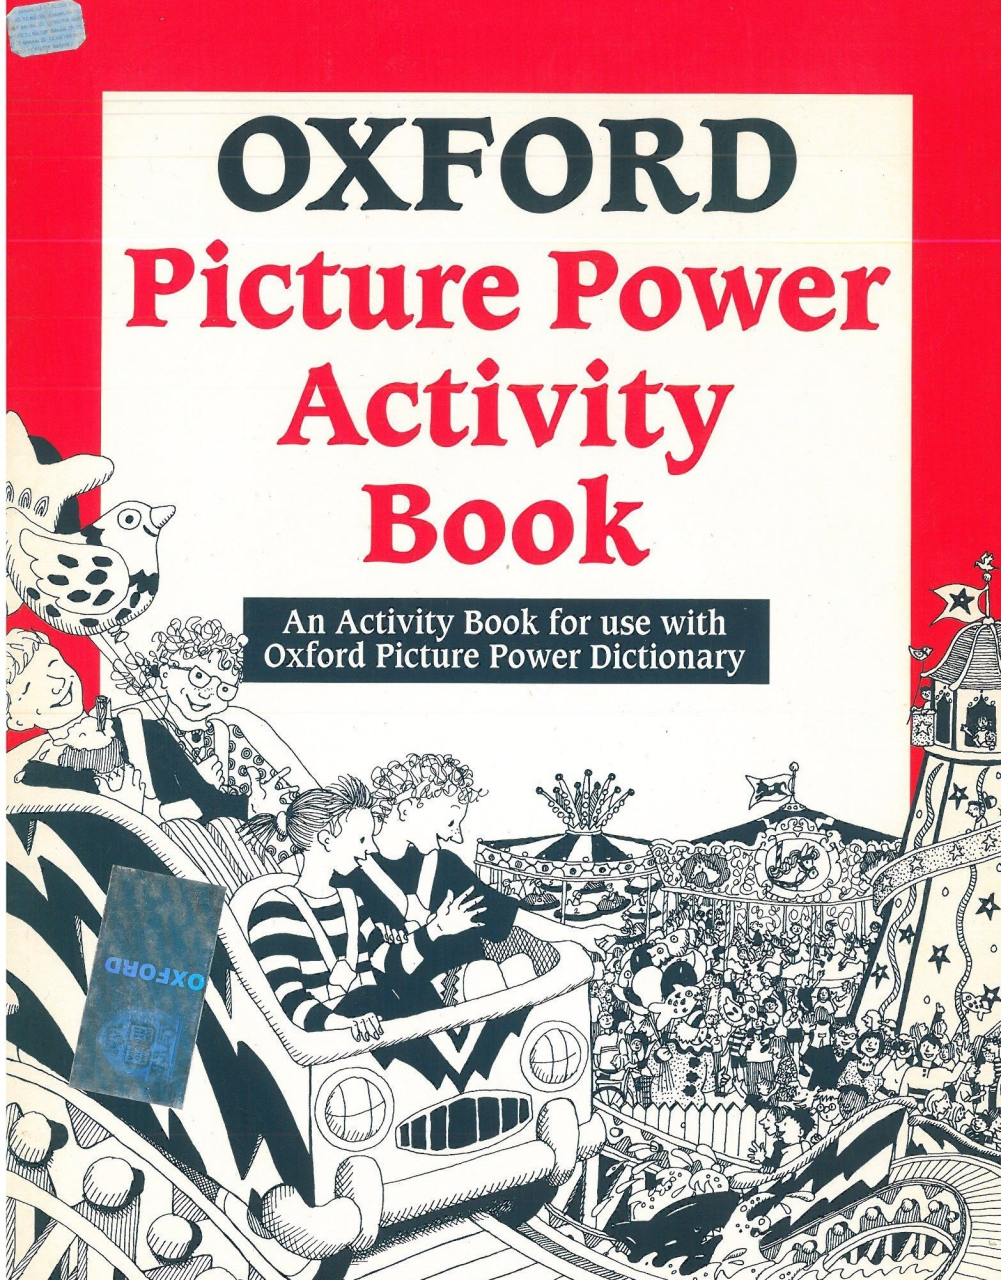 Oxford Picture Power Activity Book: An Activity Book for Use with Oxford Picture Power Dictionary